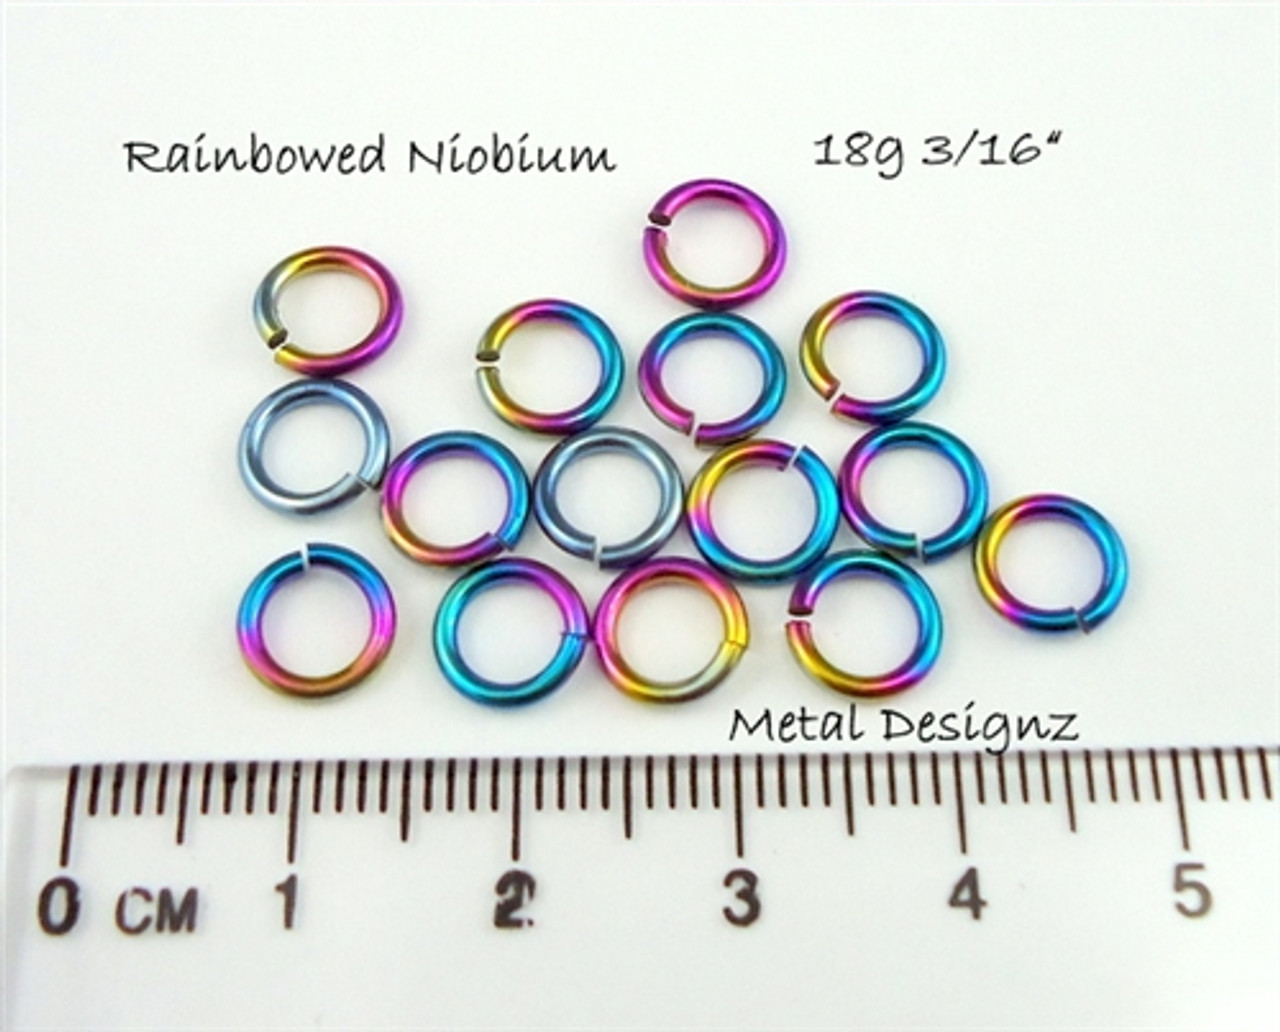 Stainless Steel Jewelry Materials Connectors | Stainless Steel Link Loop  Rings - Jewelry Findings & Components - Aliexpress